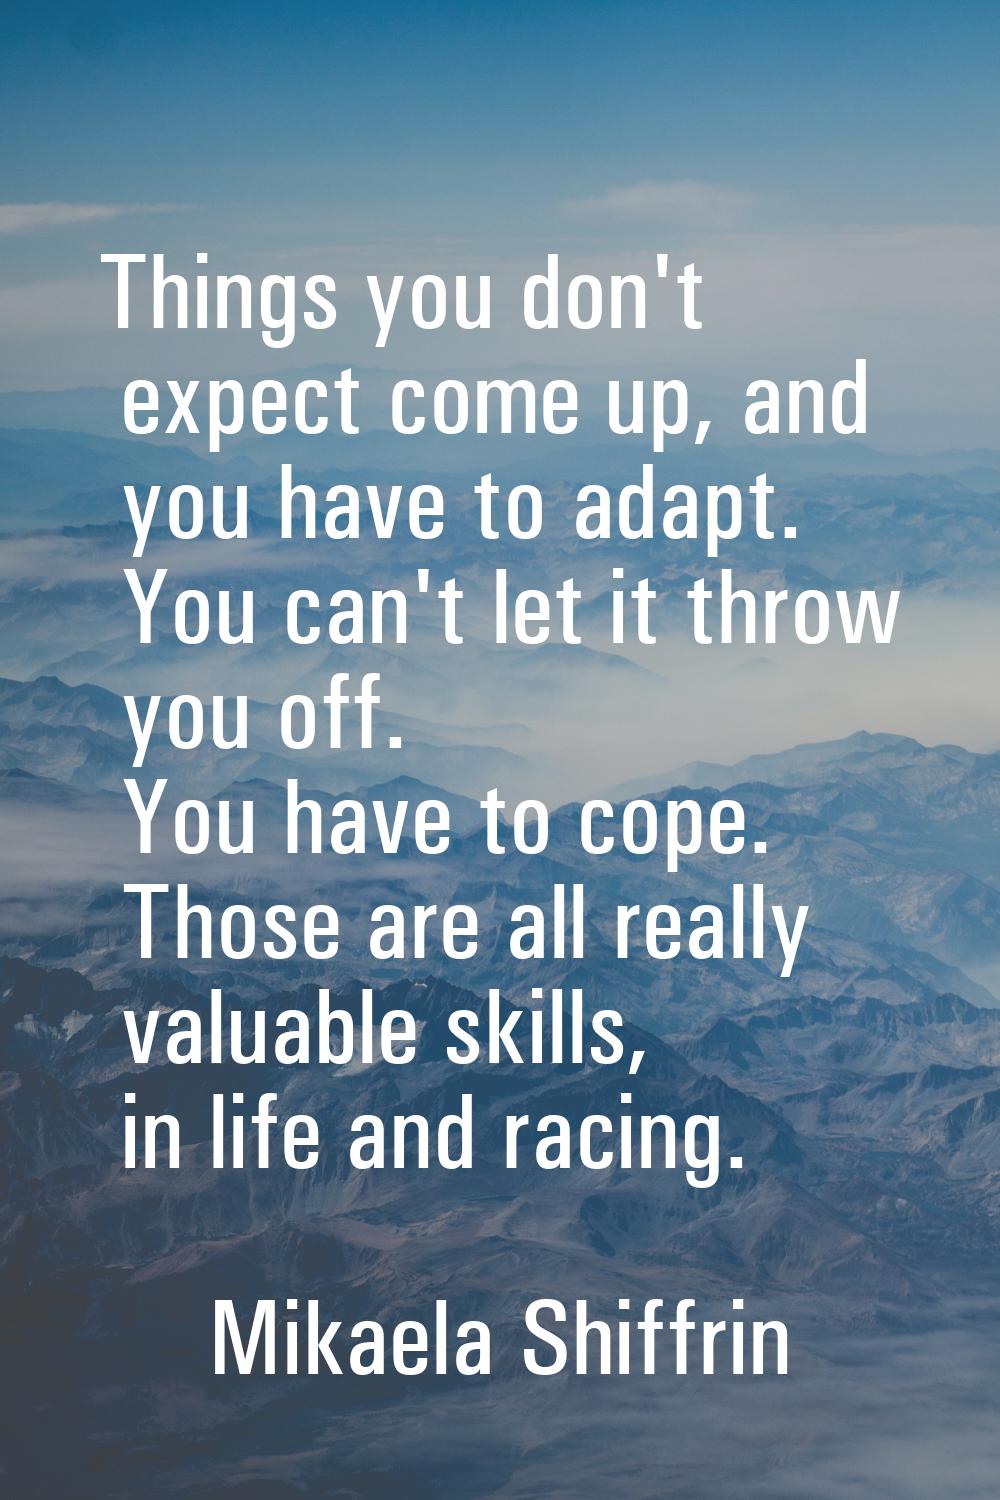 Things you don't expect come up, and you have to adapt. You can't let it throw you off. You have to